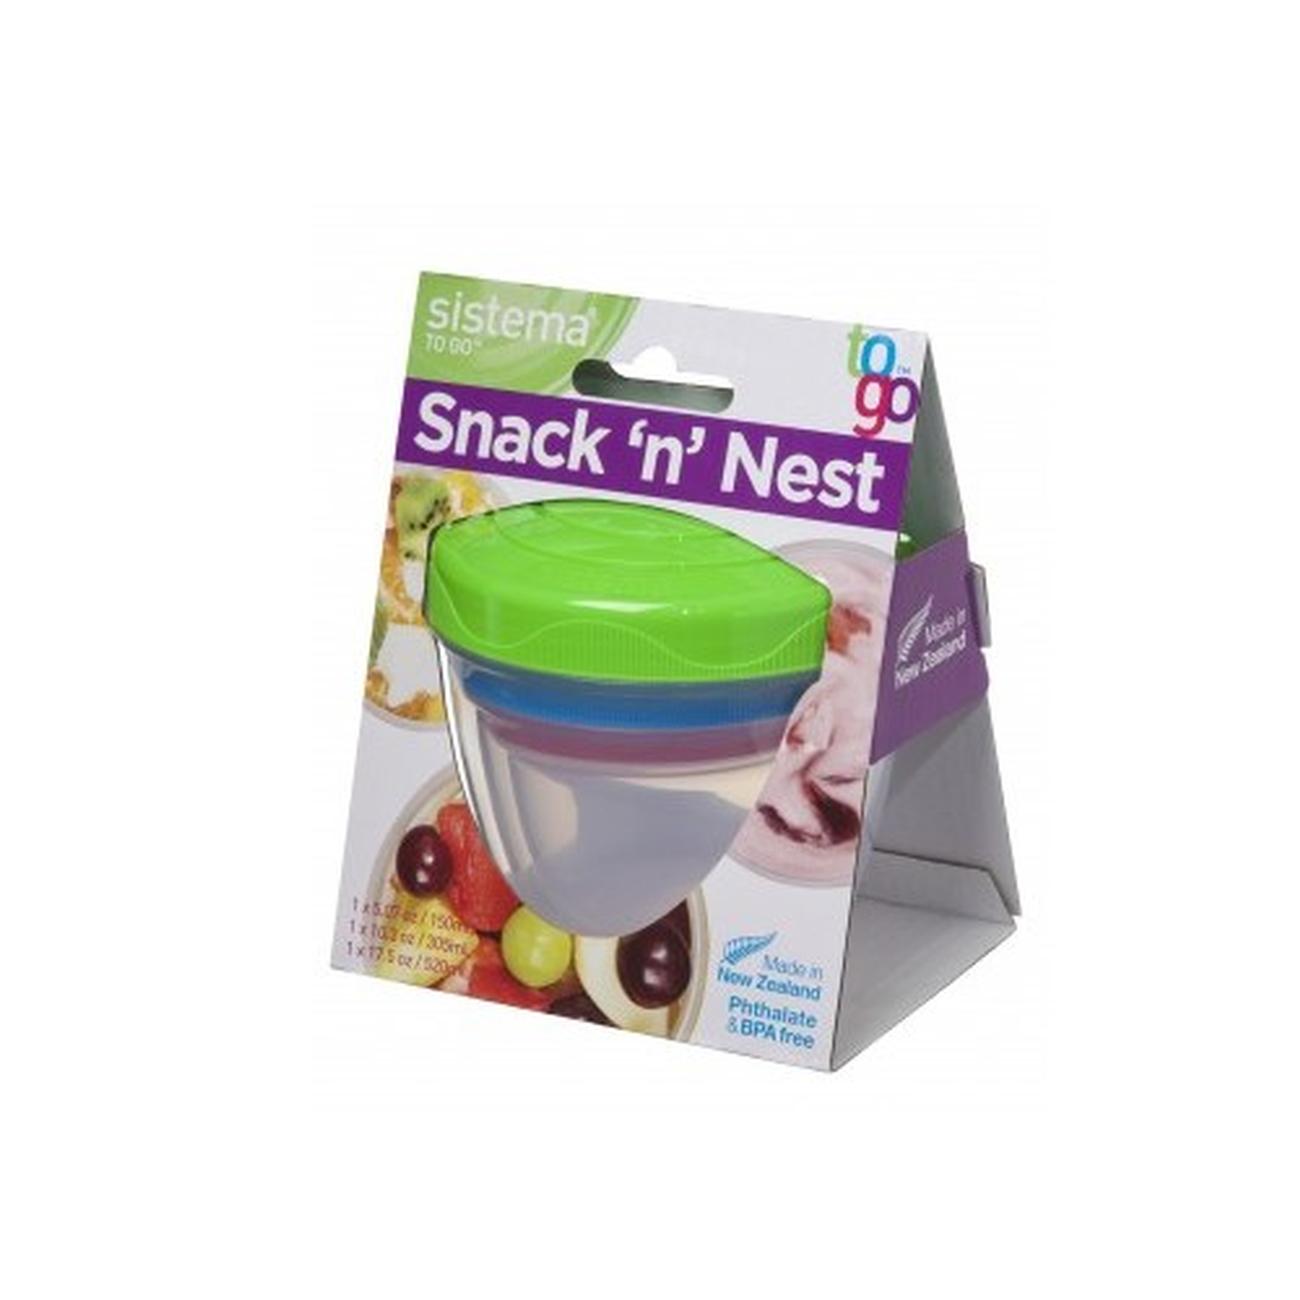 https://www.thekitchenwhisk.ie/contentfiles/productImages/Large/21483_Snack_n_Nest_Green.jpg